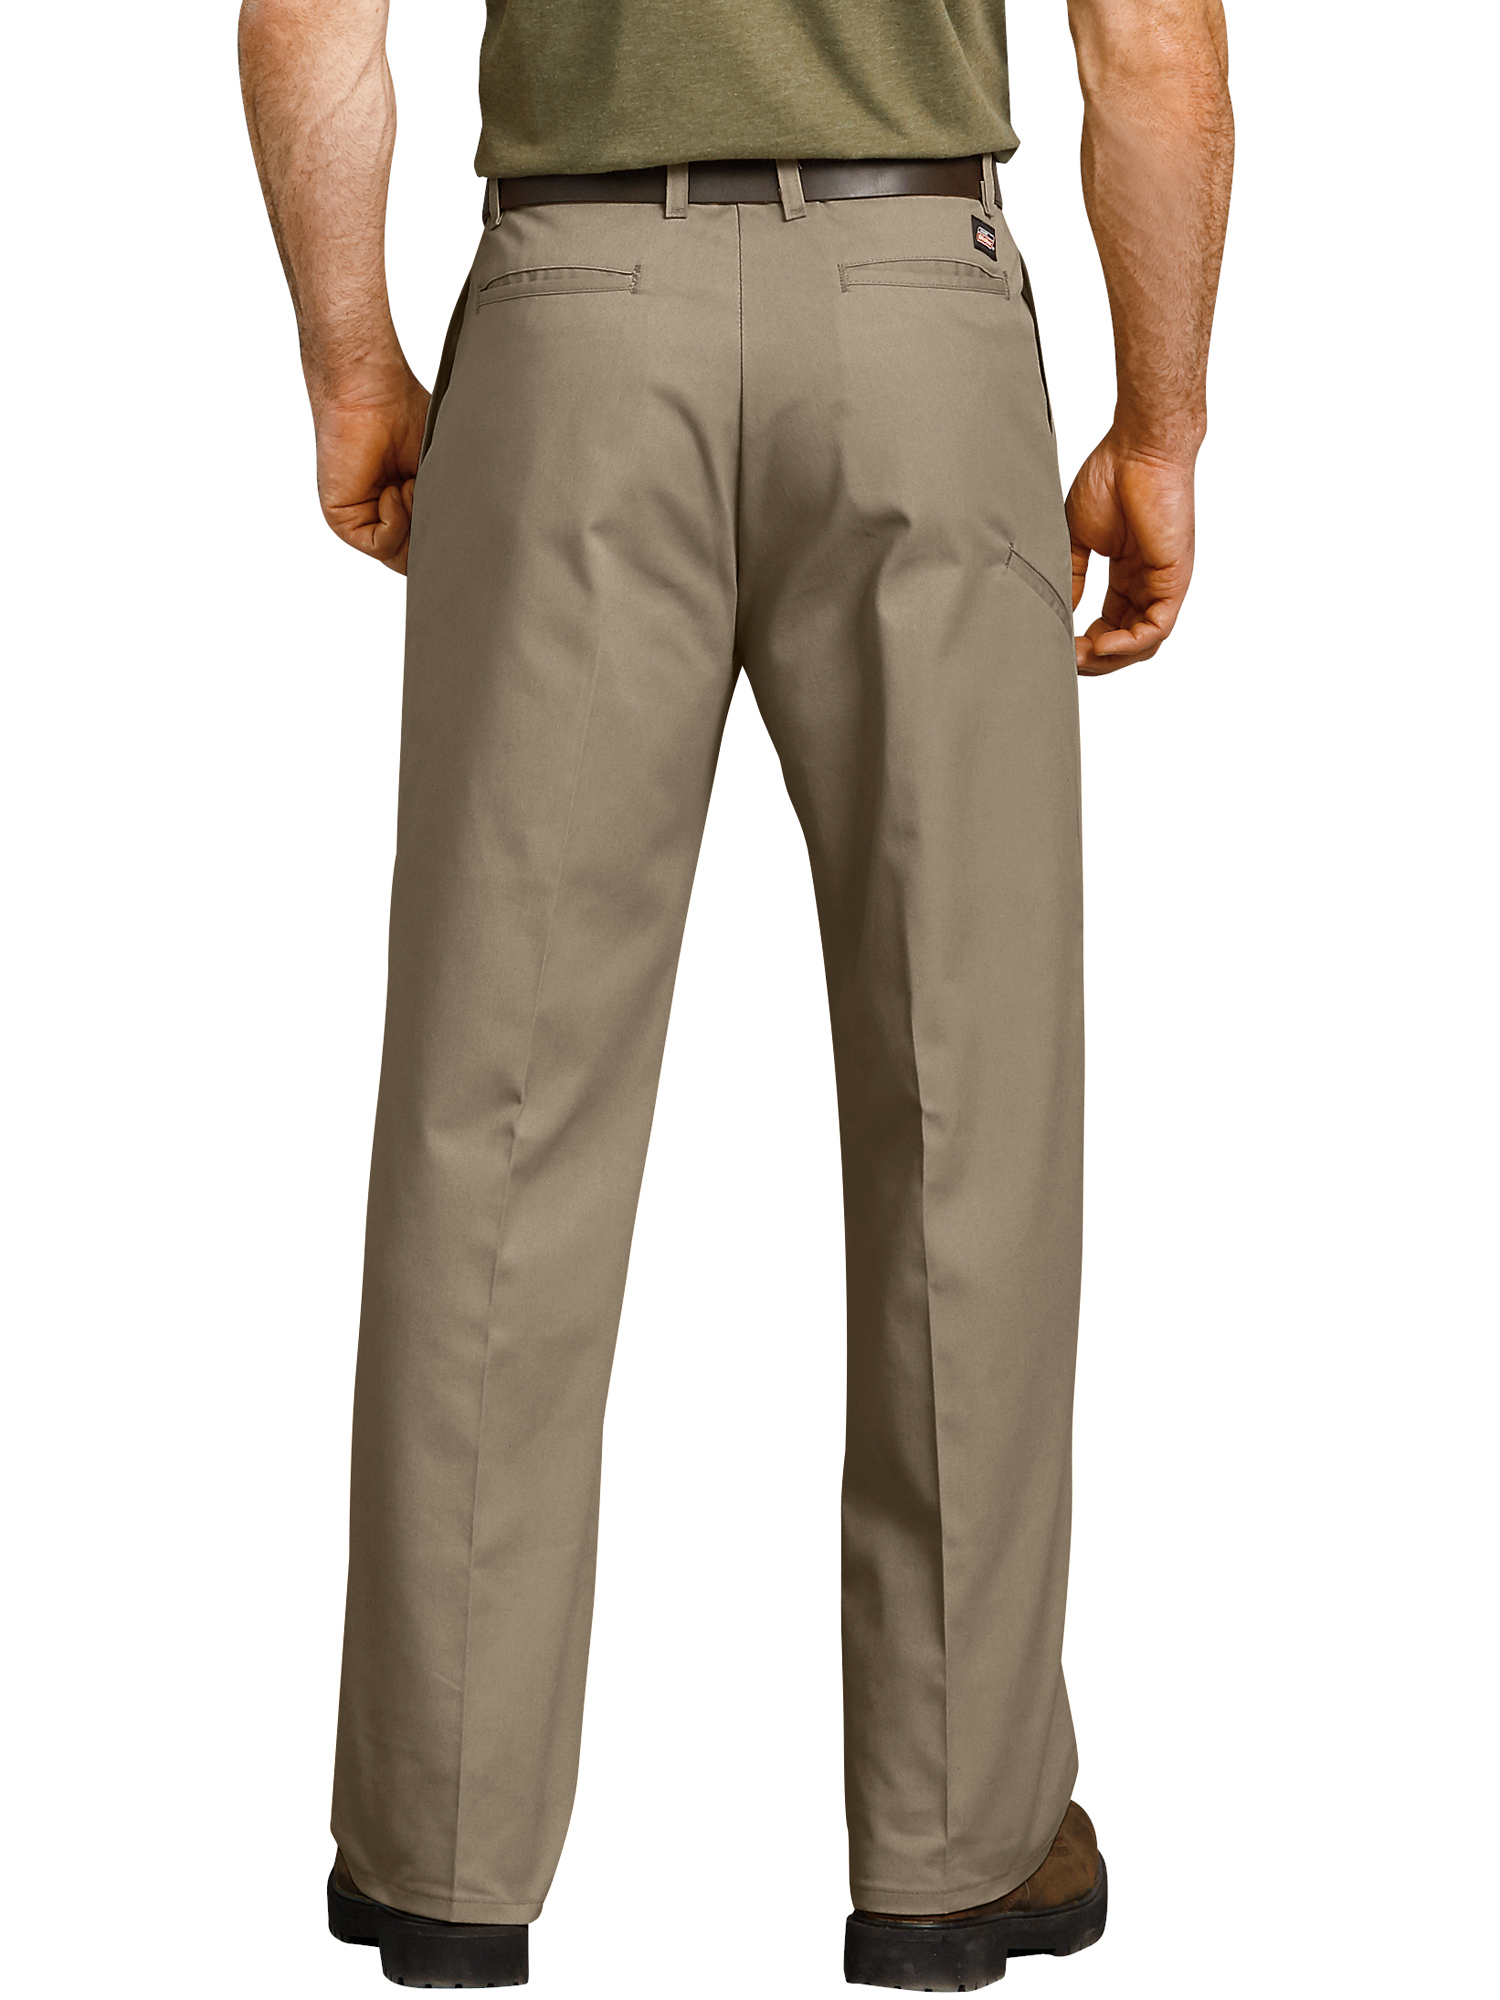 Genuine Dickies Mens Relaxed Fit Straight Leg Flat Front Flex Pant - image 2 of 2